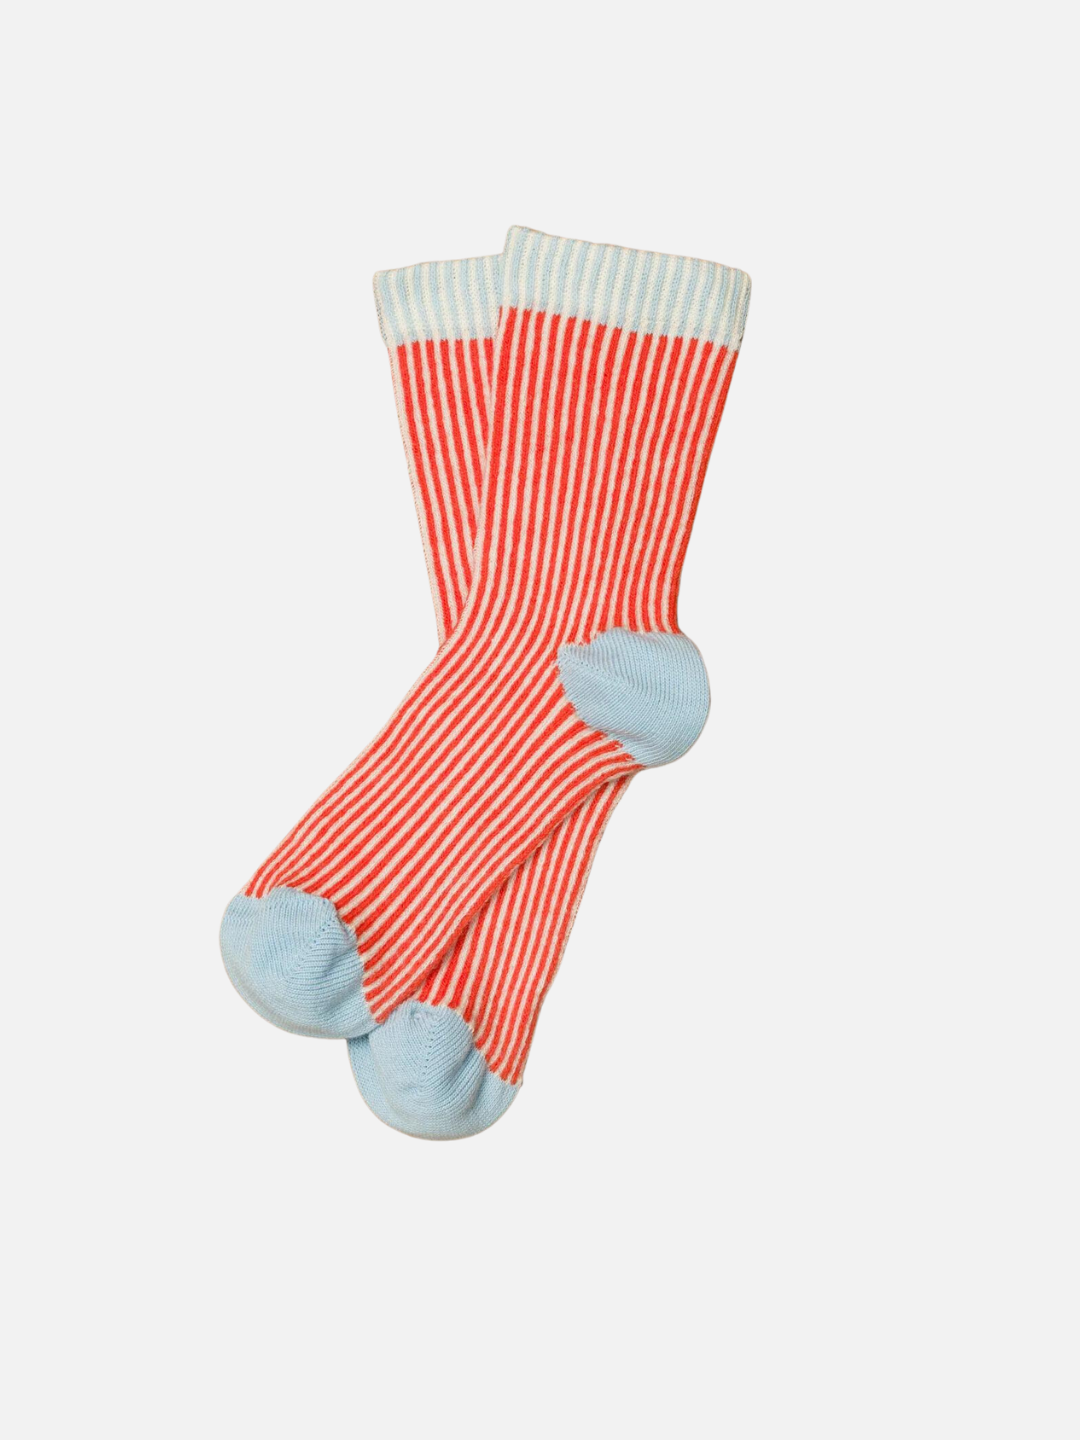 A pair of kids' ankle socks in orange and cream stripes, with baby blue and cream tops and solid baby blue toes and heels